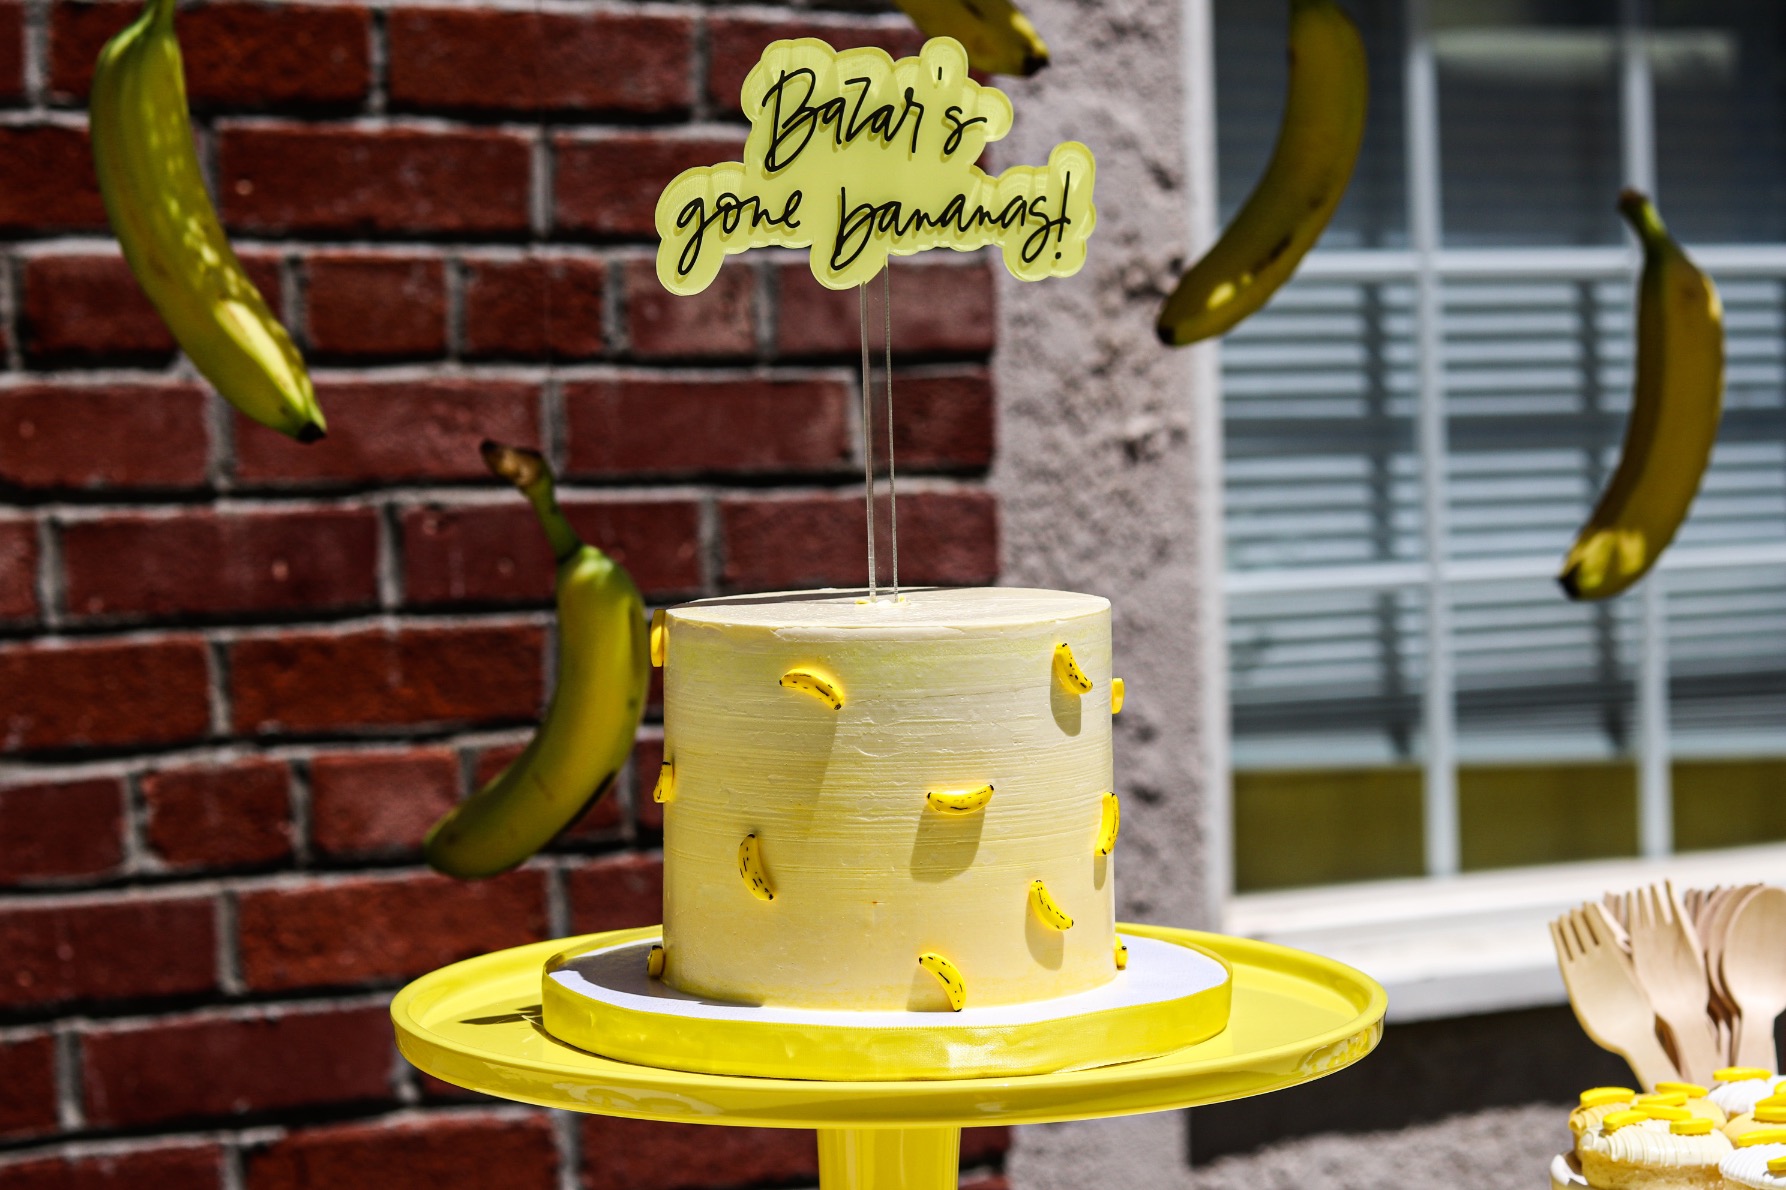 bananas themed 7th birthday party, We&#8217;ve gone bananas themed 7th birthday party